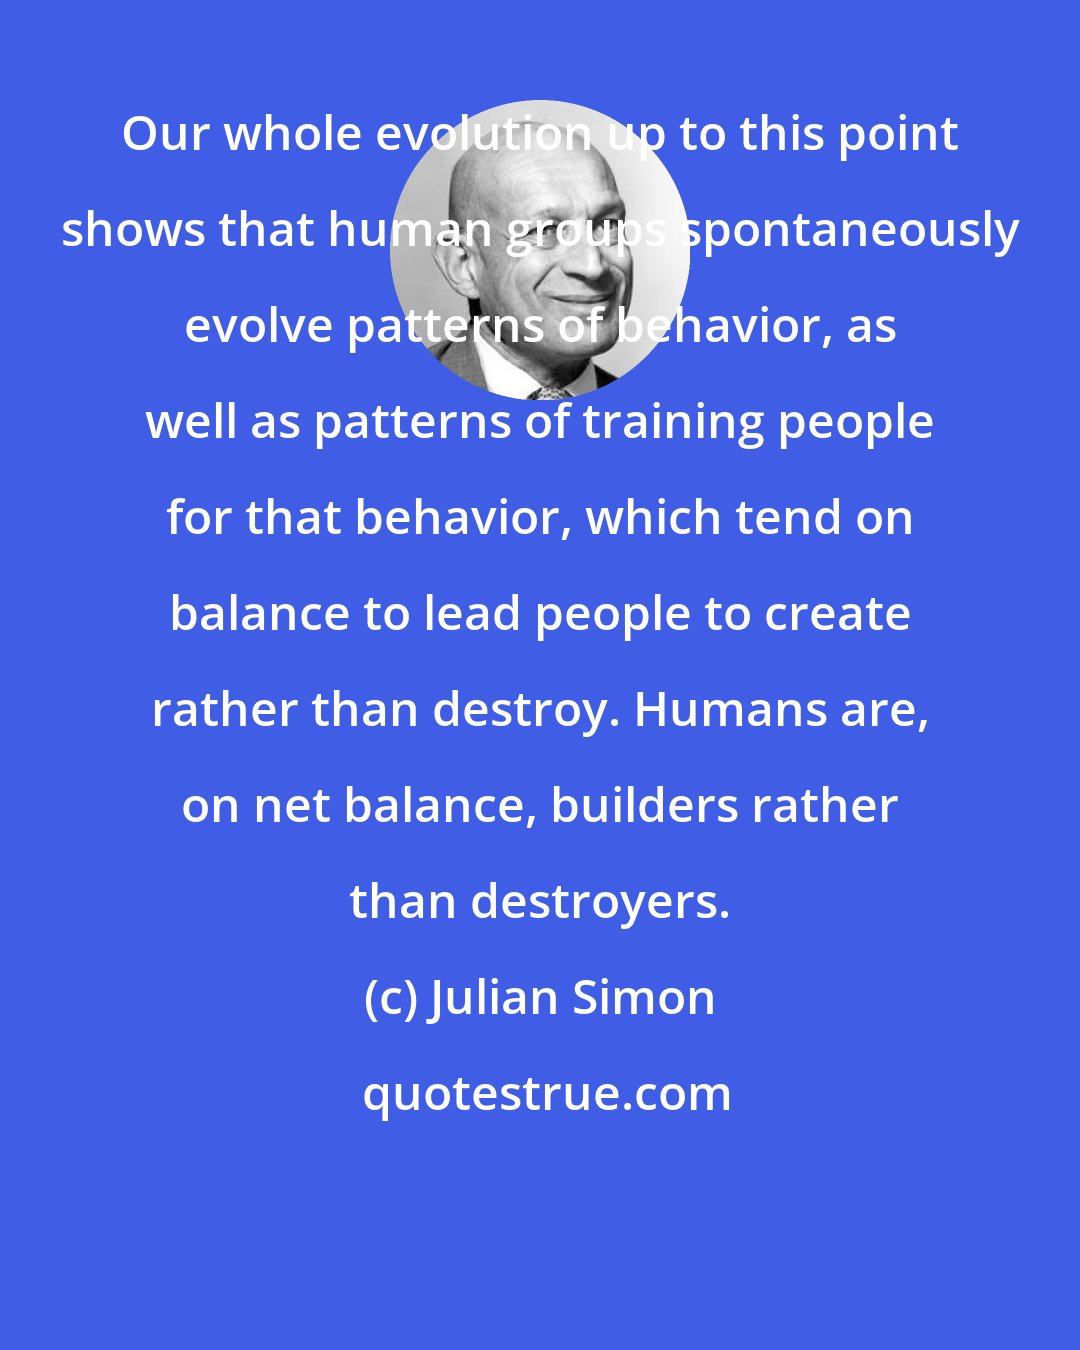 Julian Simon: Our whole evolution up to this point shows that human groups spontaneously evolve patterns of behavior, as well as patterns of training people for that behavior, which tend on balance to lead people to create rather than destroy. Humans are, on net balance, builders rather than destroyers.